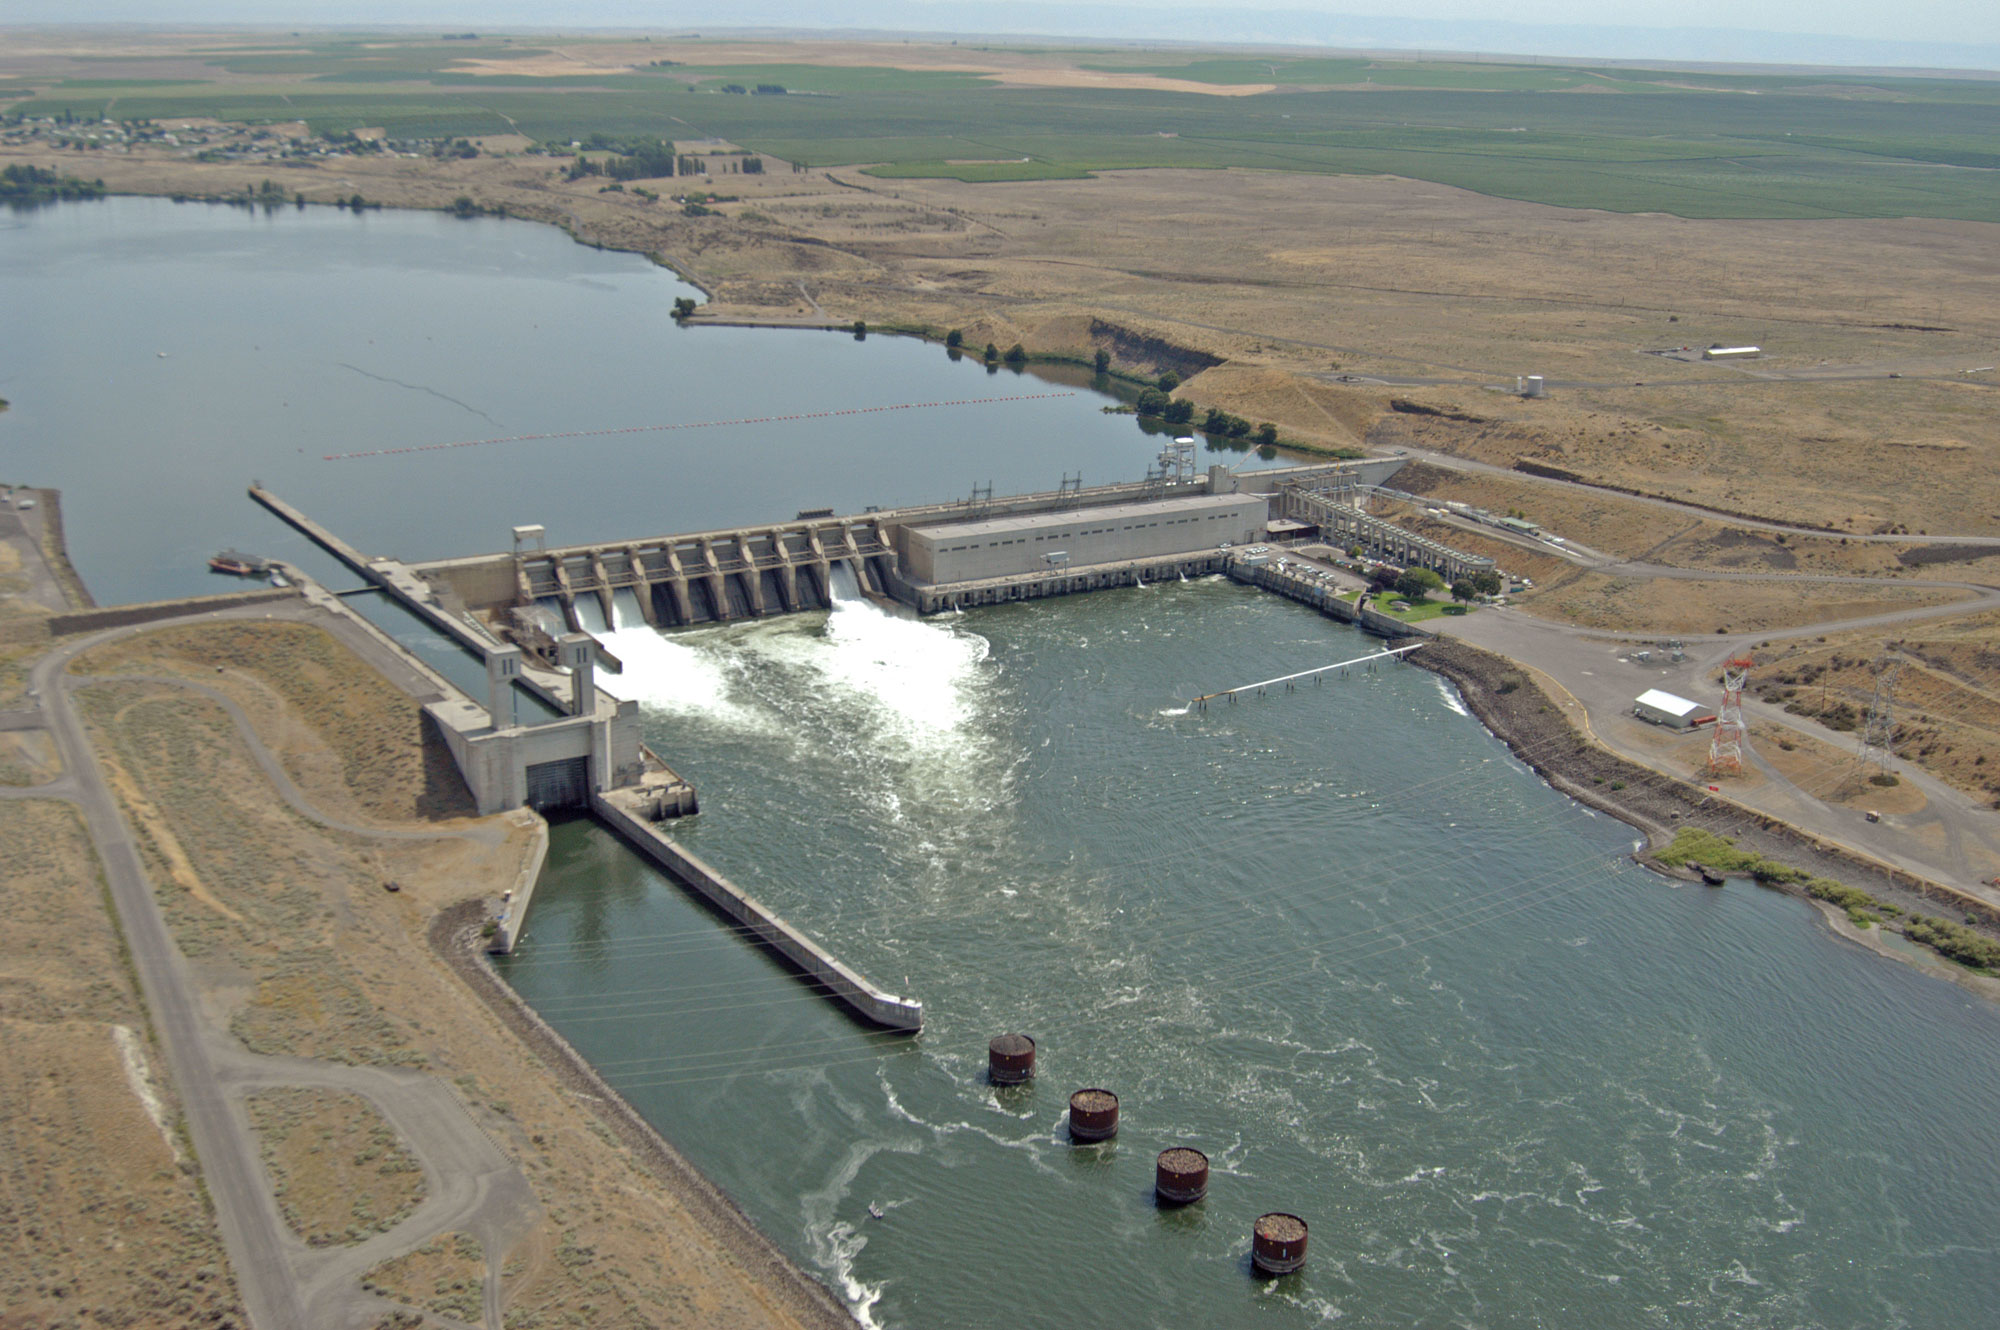 Aerial photograph of Ice Harbor Dam on the Snake River in eastern Washington. The photo shows a wide river with a concrete dam spanning it. The surrounding landscape is dry with yellow vegetation, although a large patch of green vegetation can be seen in the background.